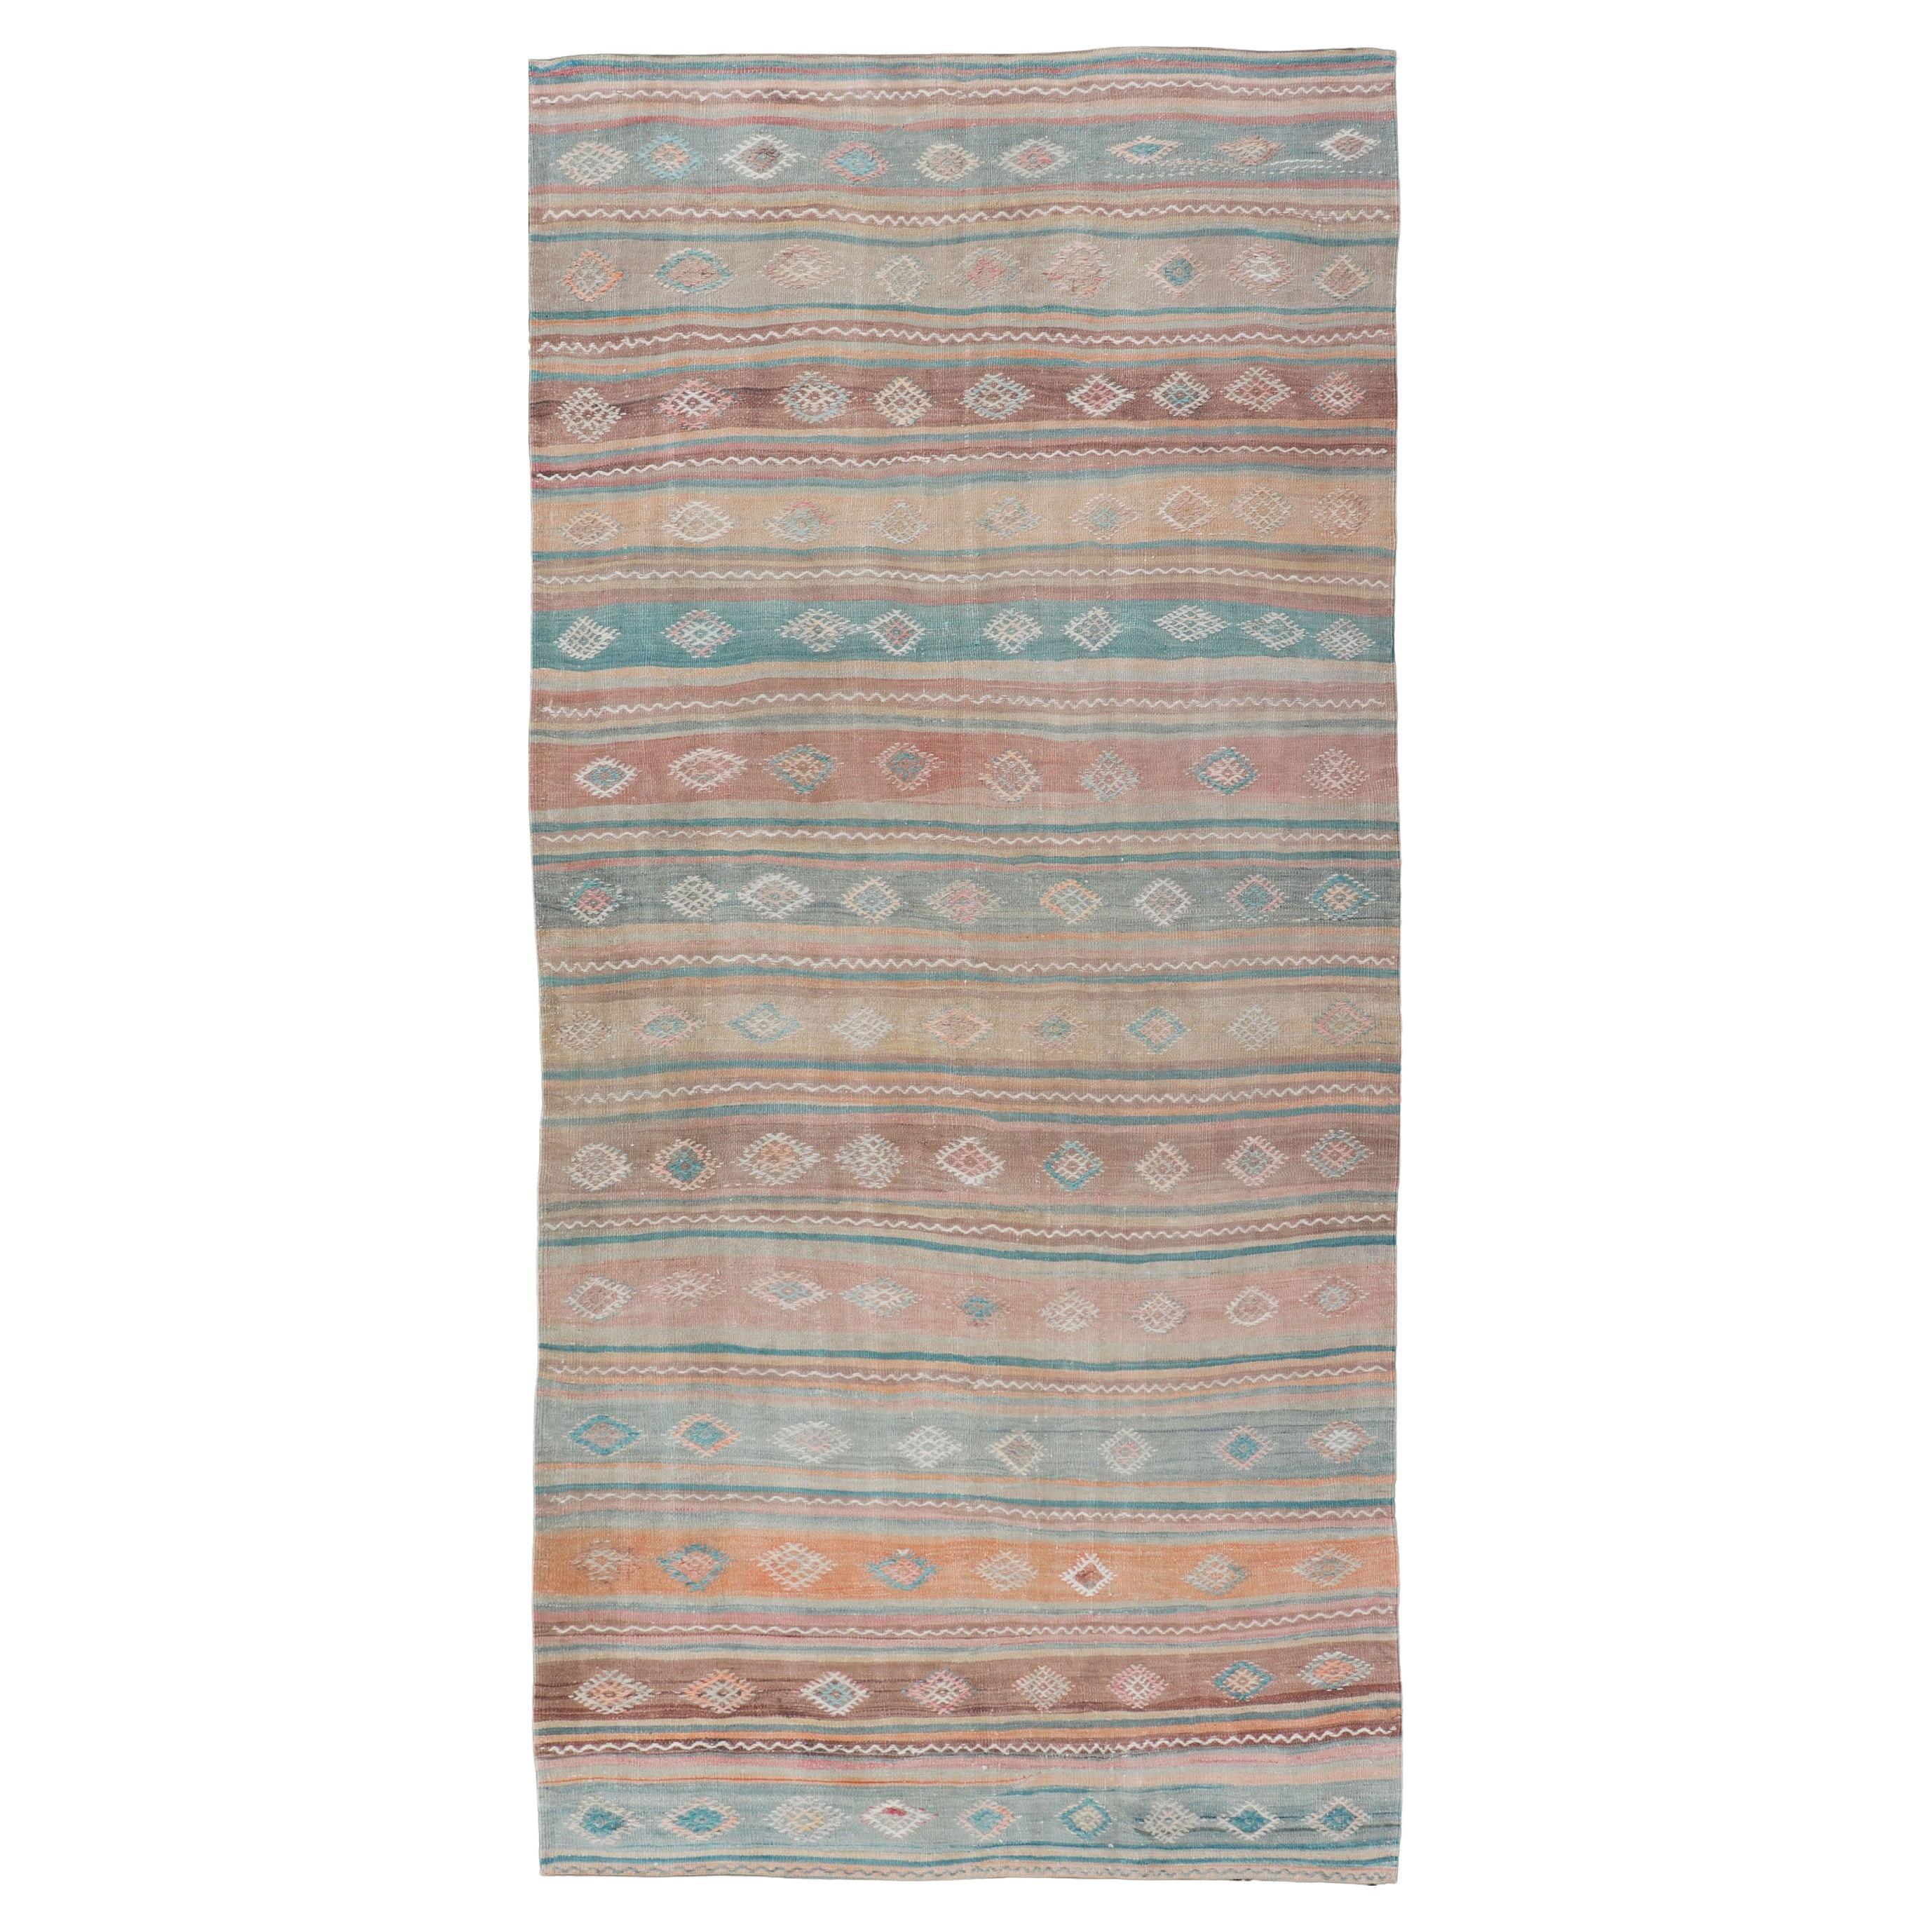 Vintage Long Colorful Kilim Gallery Rug with Stripe Design in Soft Colors